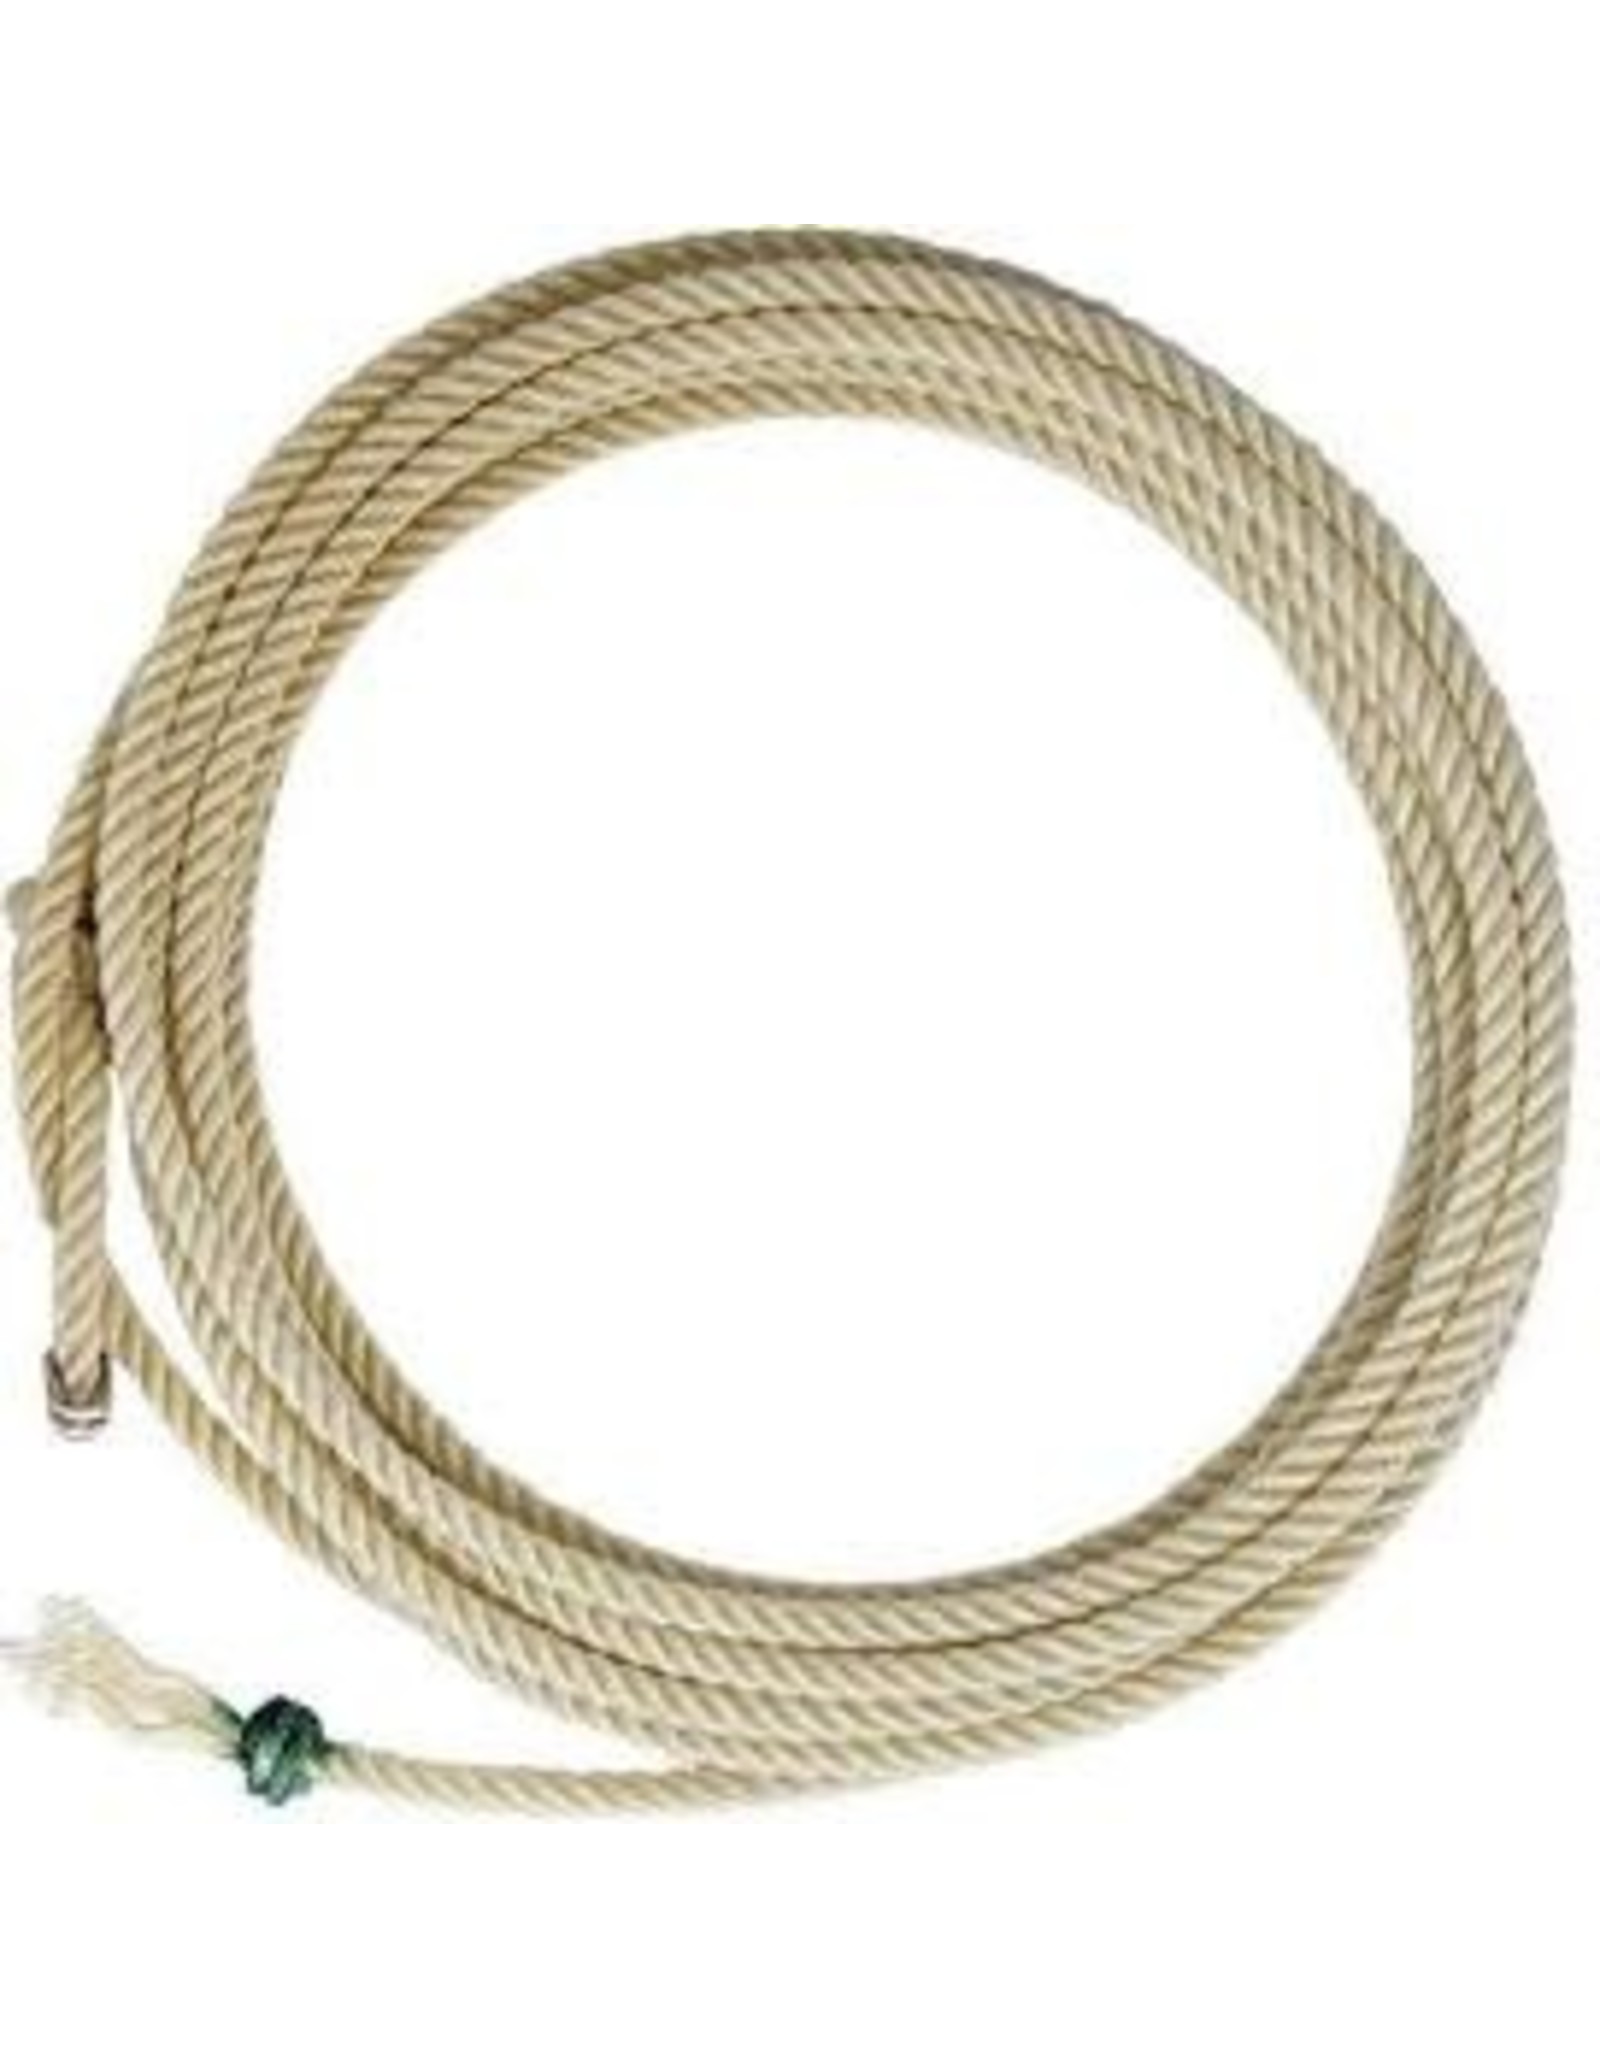 King 4S51T28 Calf Rope, 10.5 Poly 51T x 28 4 Strand